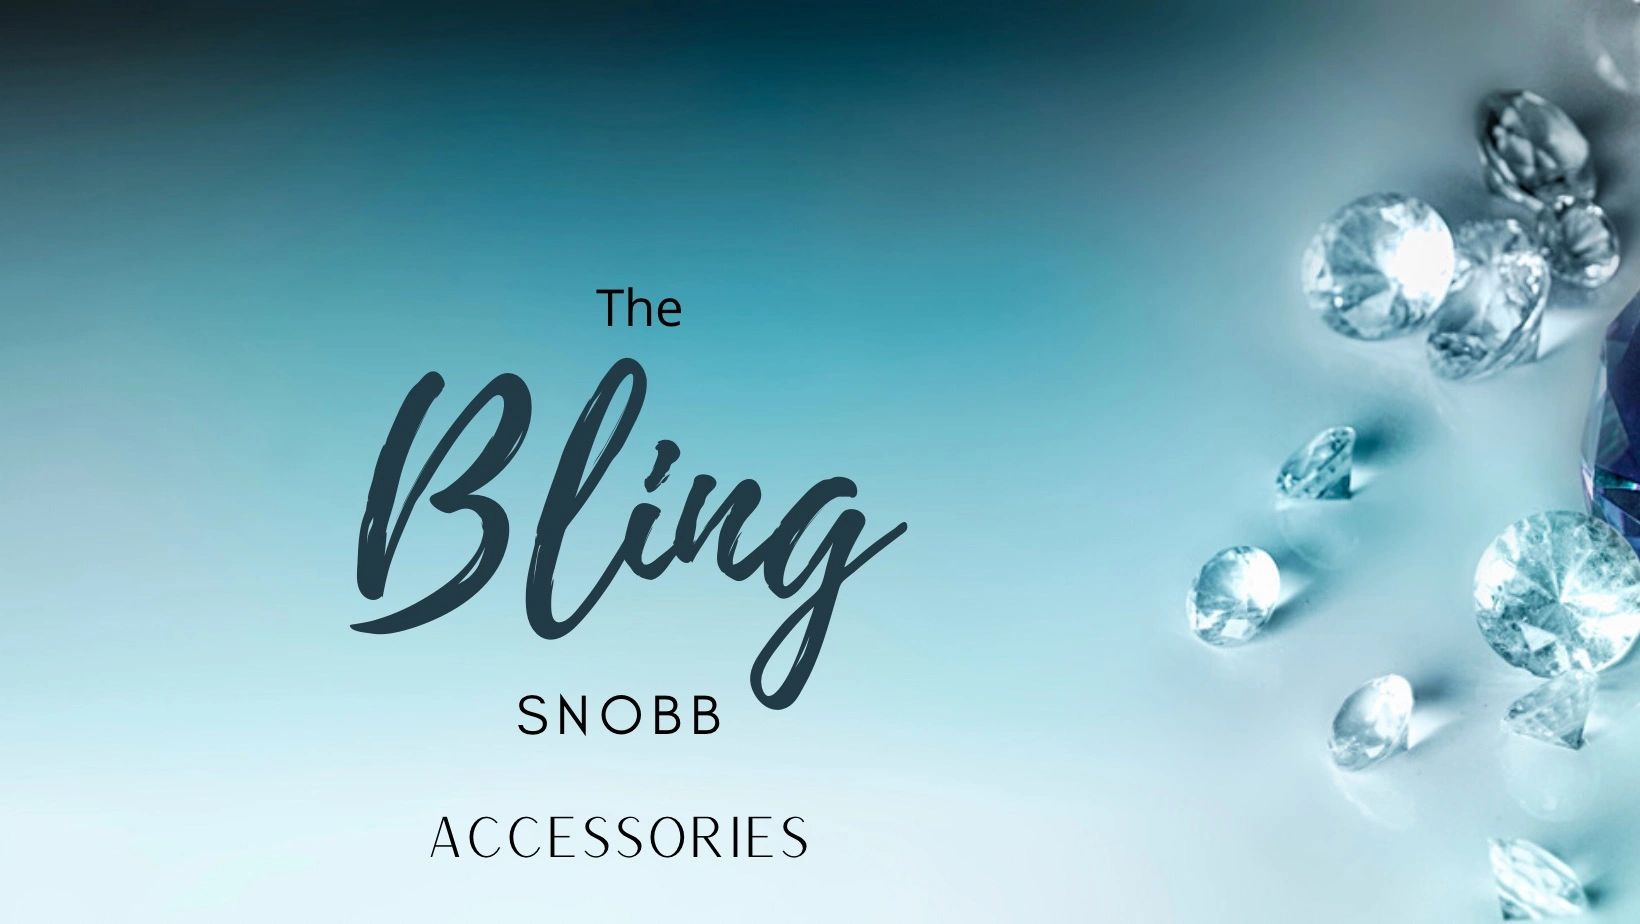 The Bling Snobb Accessories